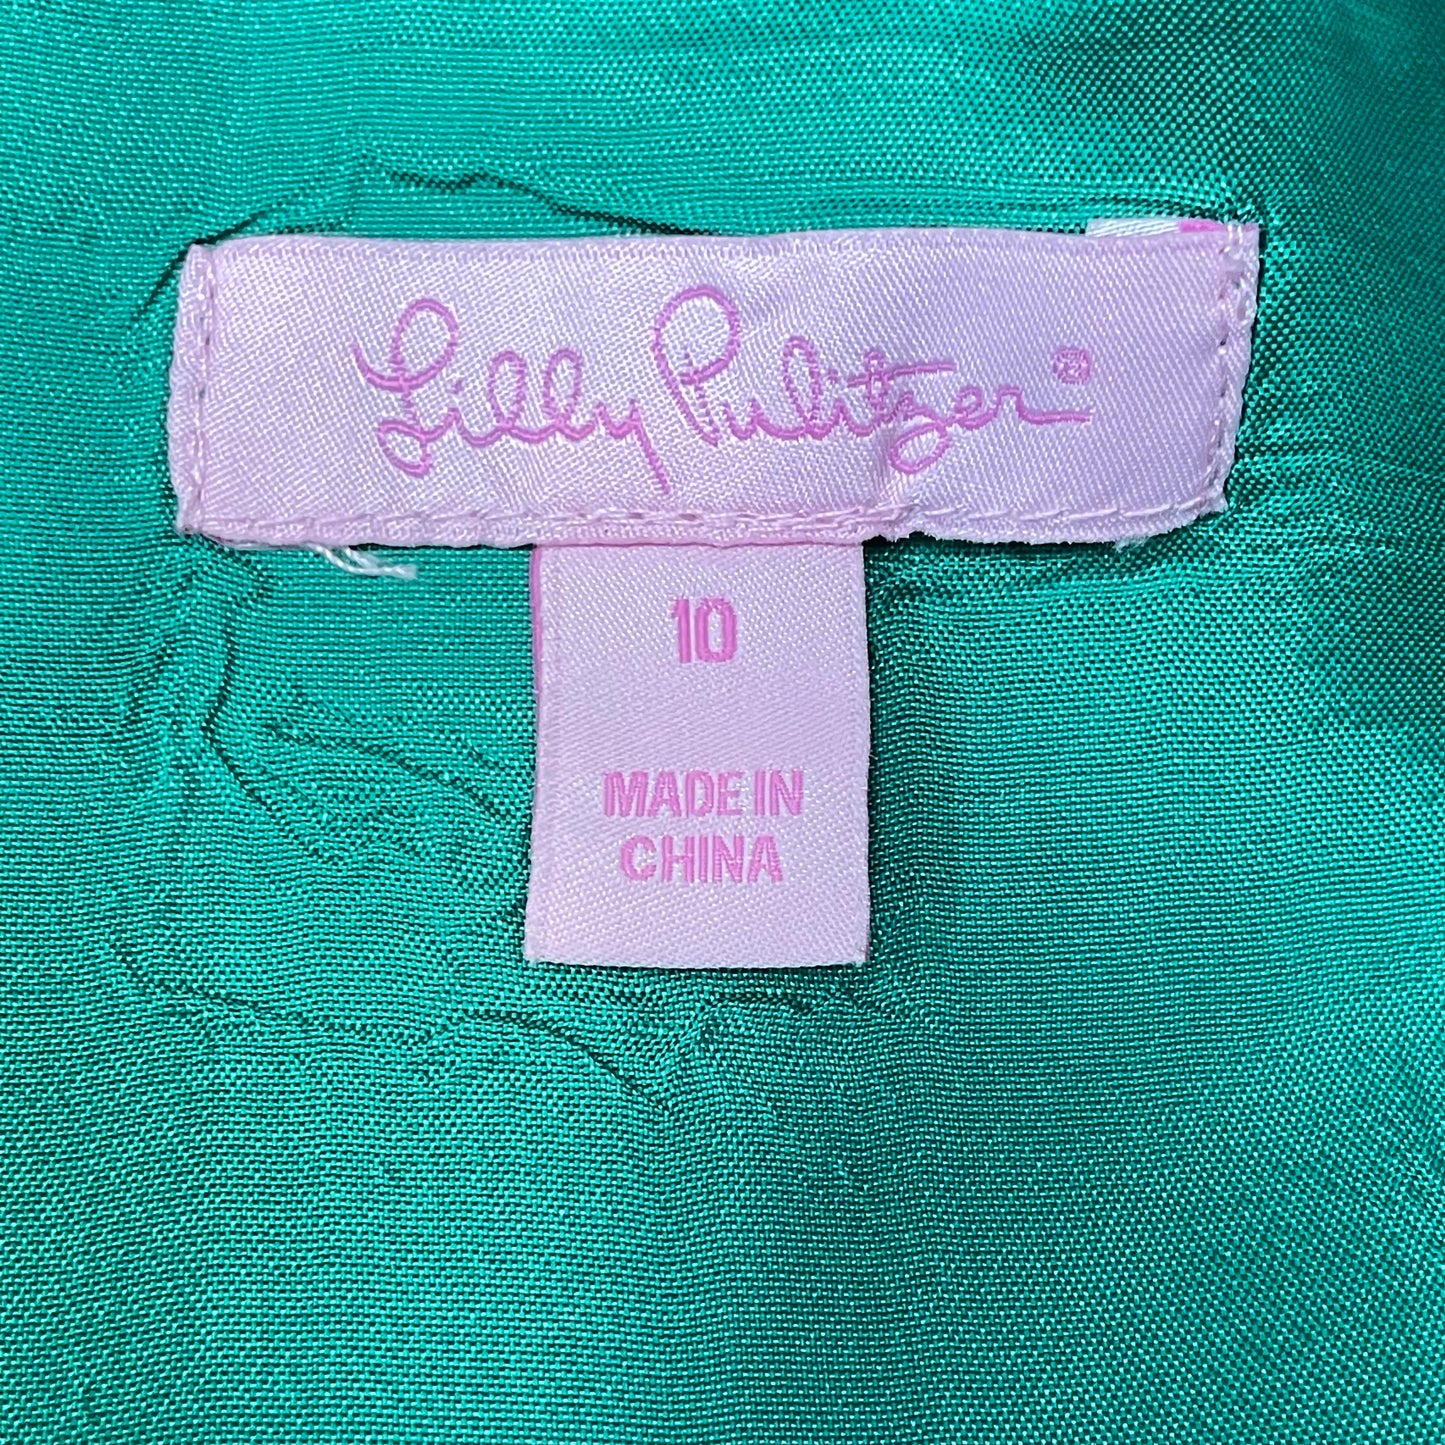 Skirt Designer By Lilly Pulitzer  Size: 10